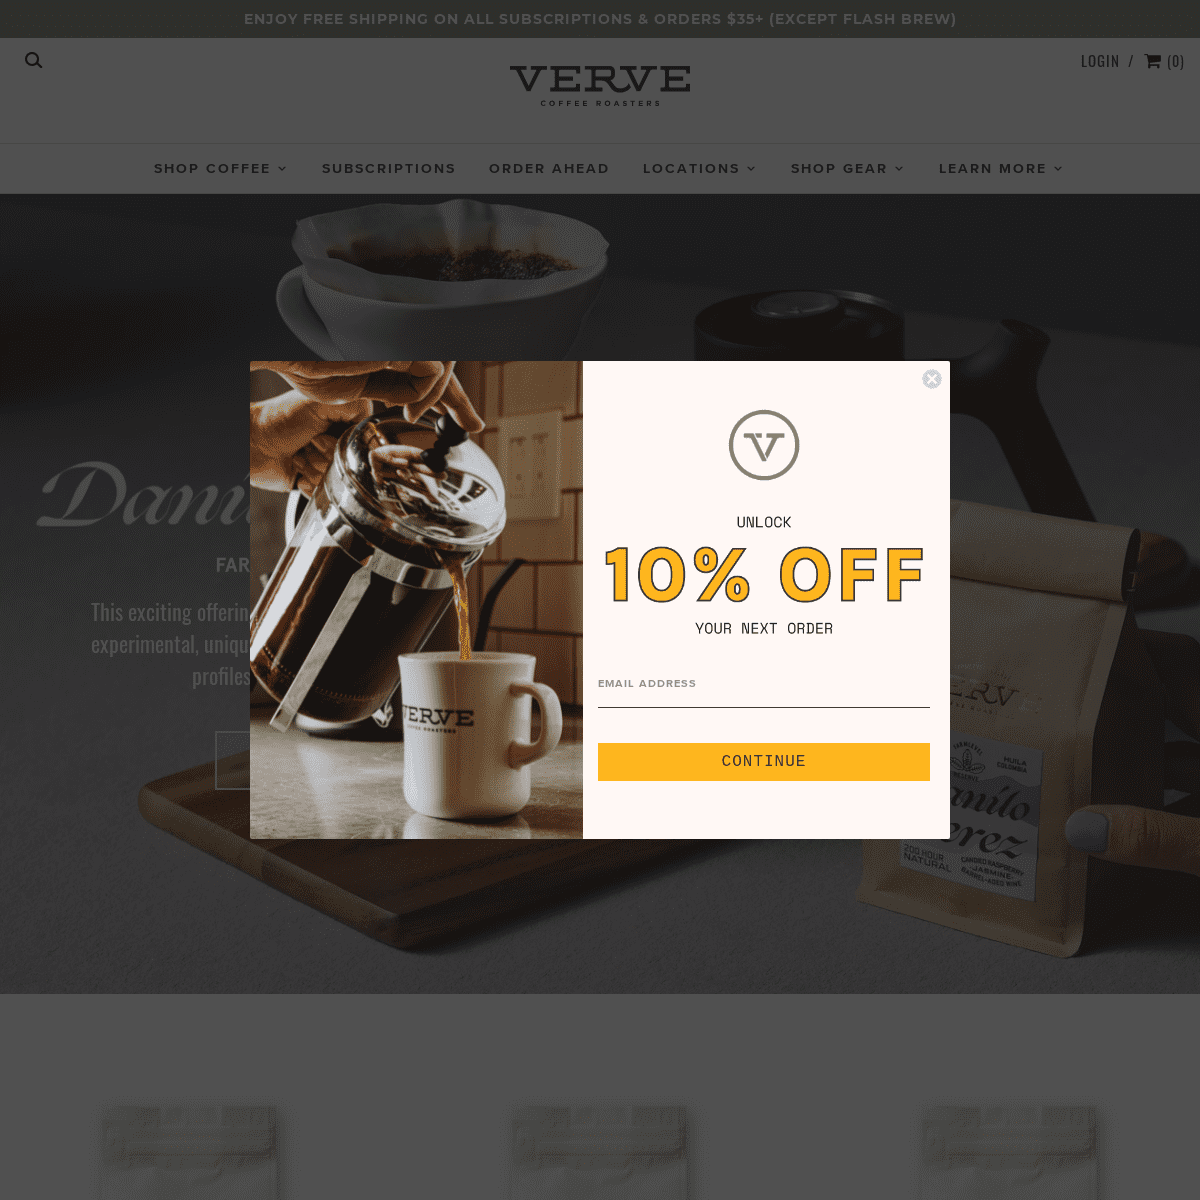 A complete backup of https://vervecoffeeroasters.com